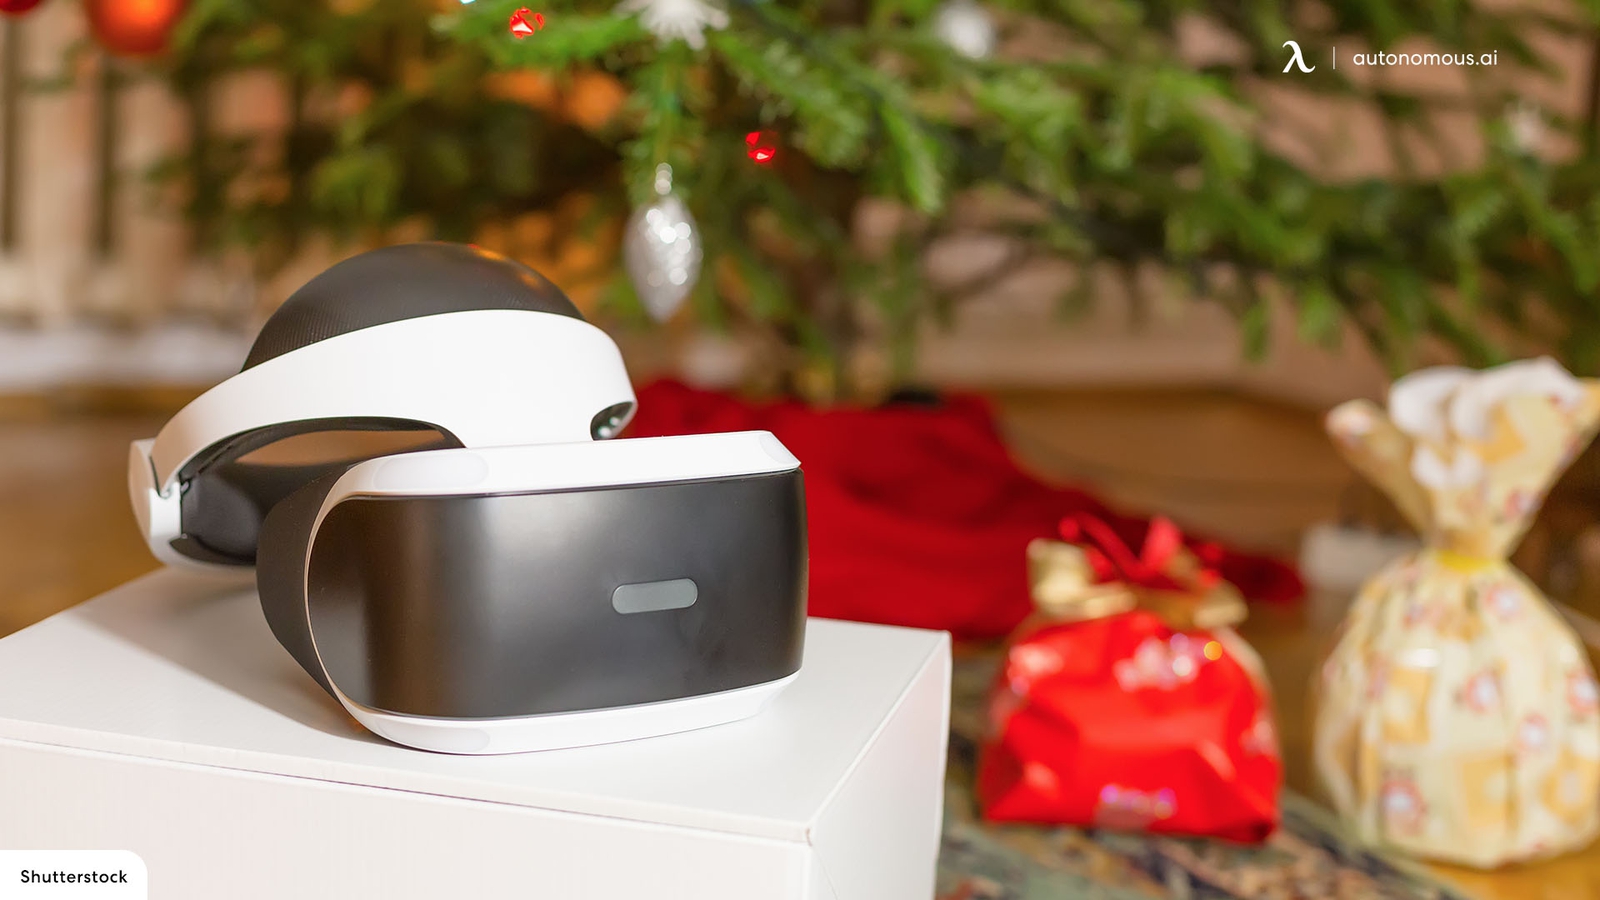 What Christmas Tech Gifts Does Everyone Want This Holiday?